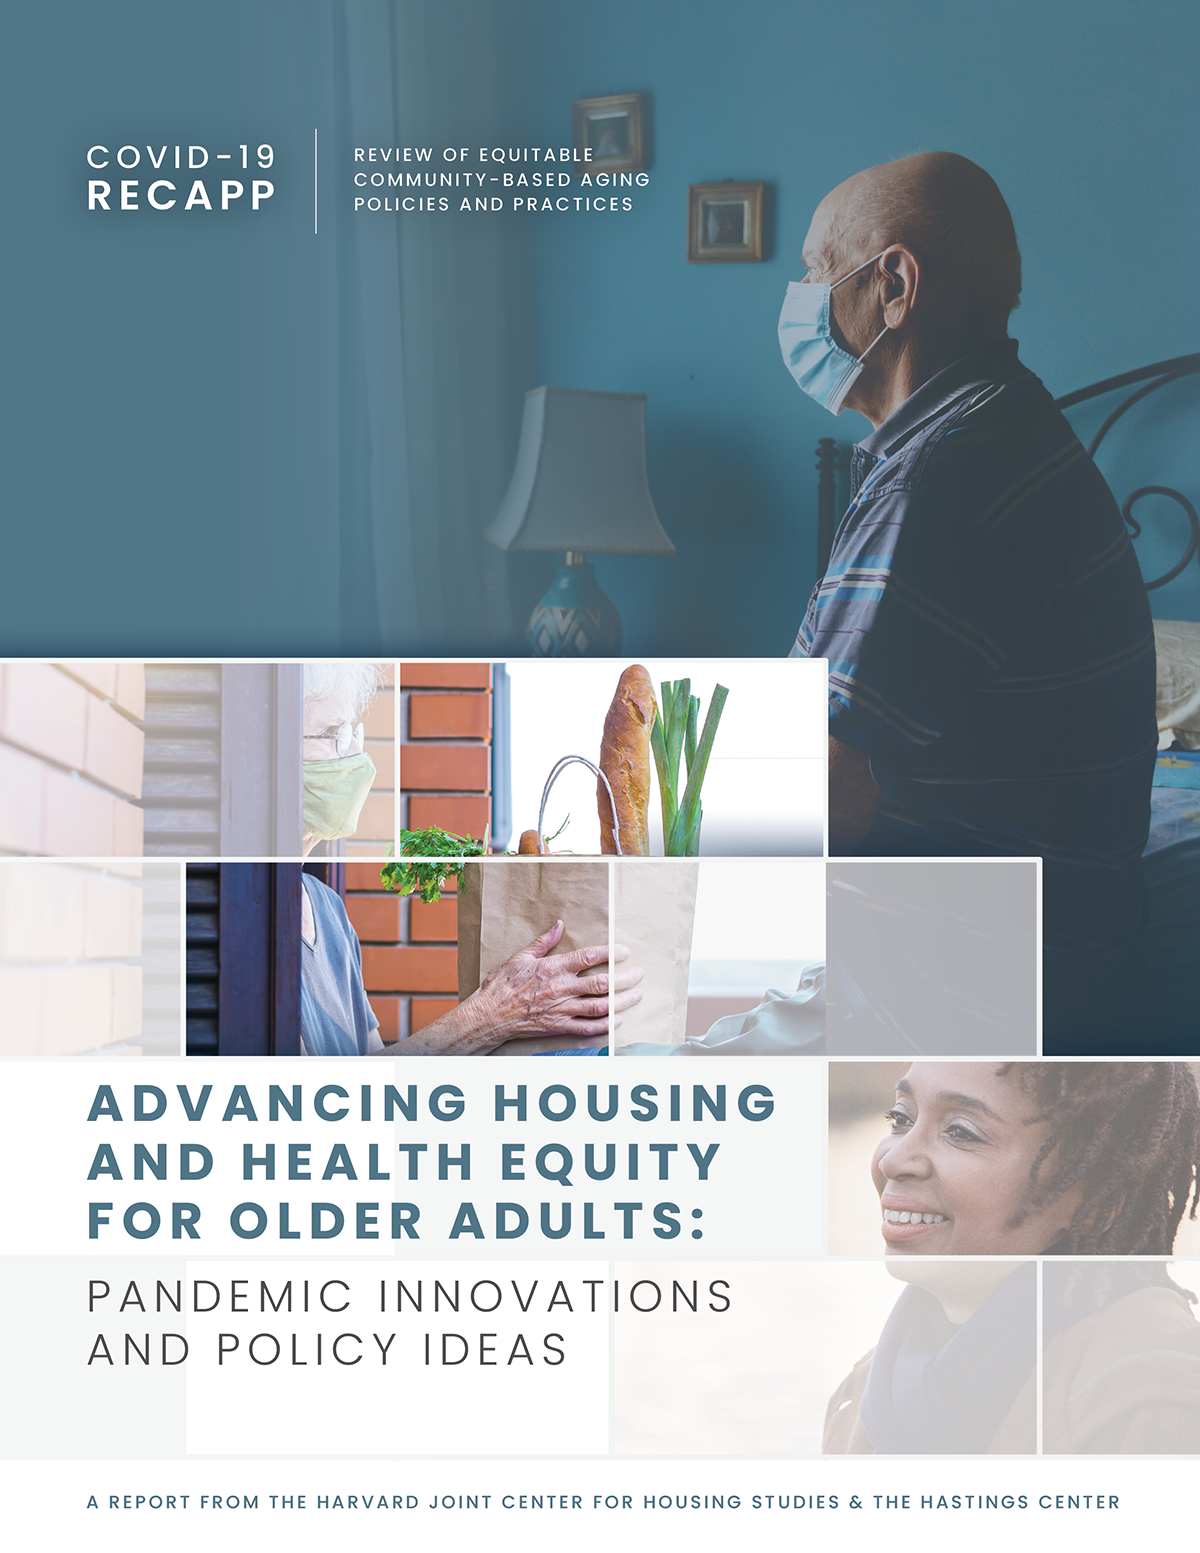 Advancing Housing and Health Equity for Older Adults: Pandemic Innovations